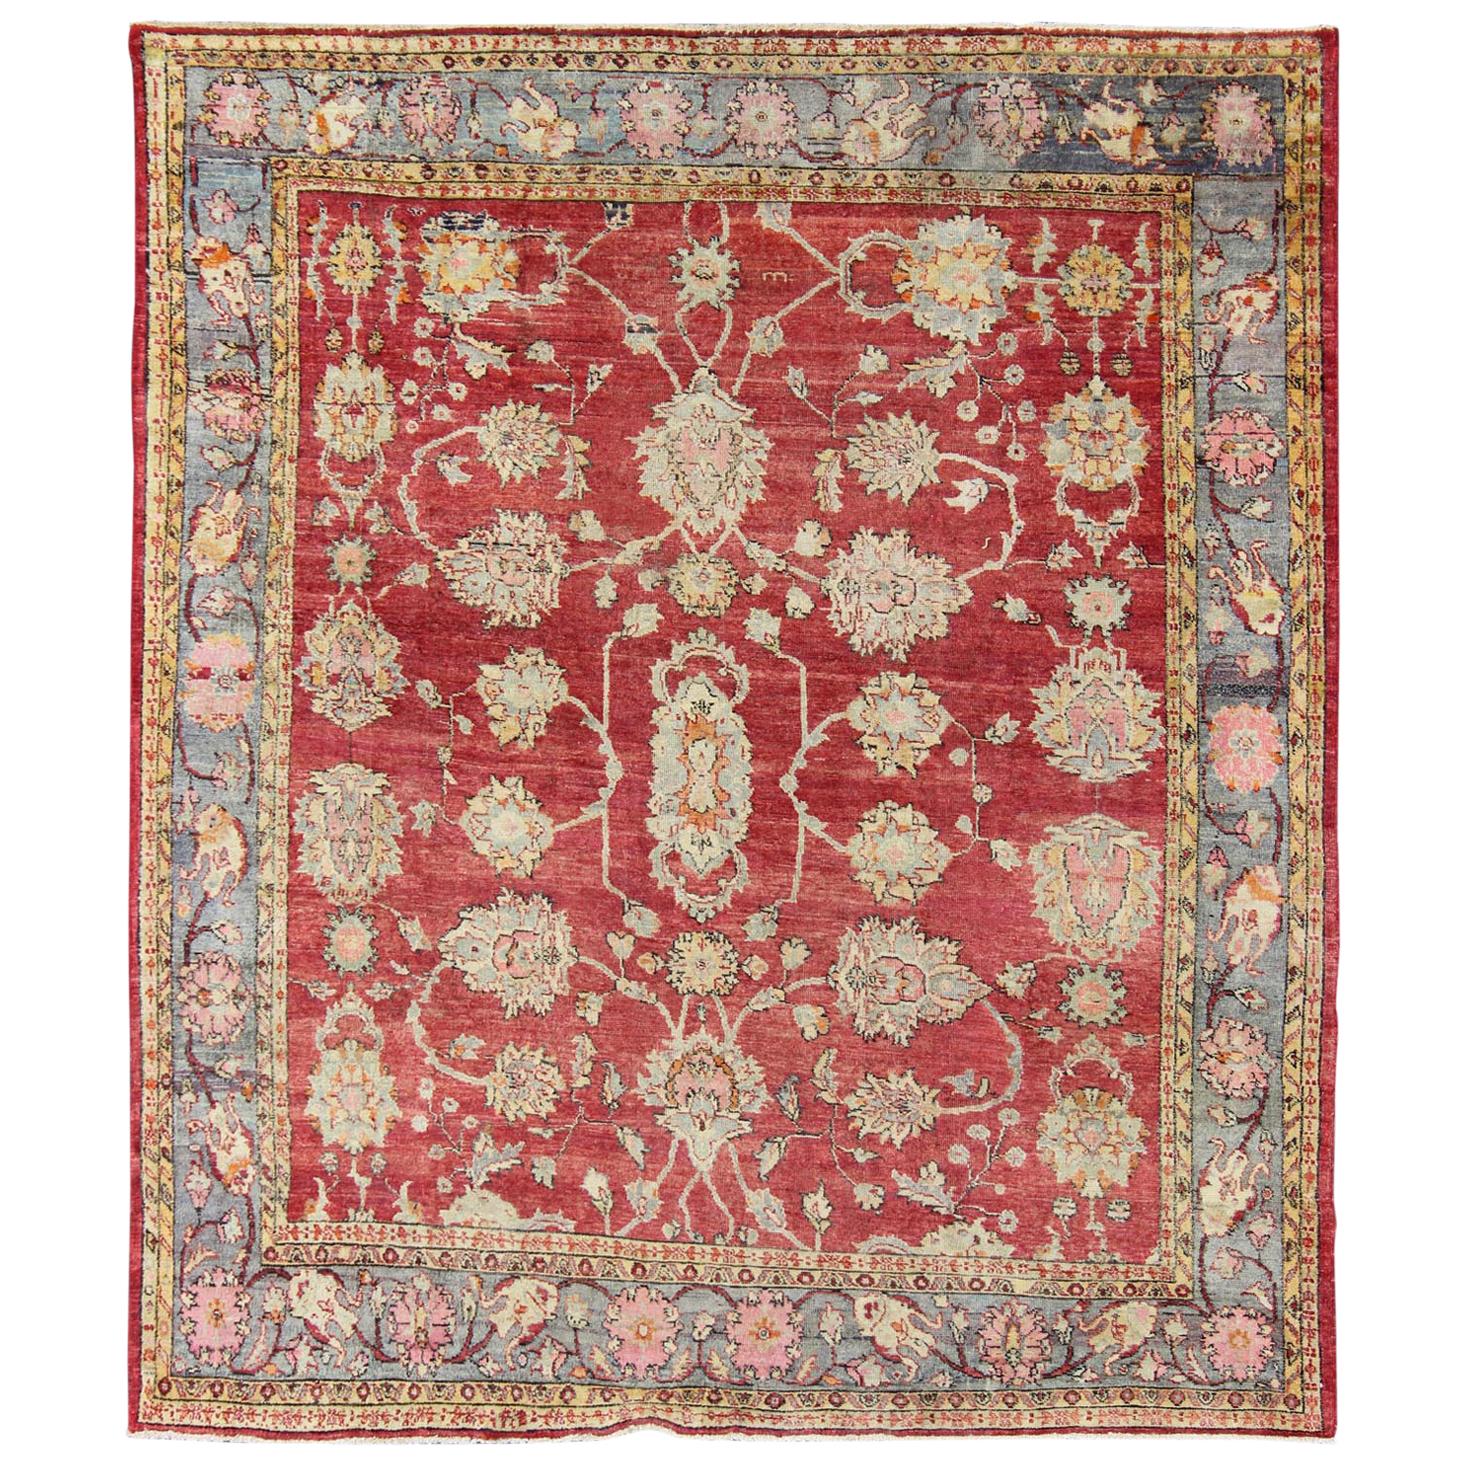 Antique Turkish Oushak Rug in Red, Blue/Gray Border, L. Green, Yellow & Pink